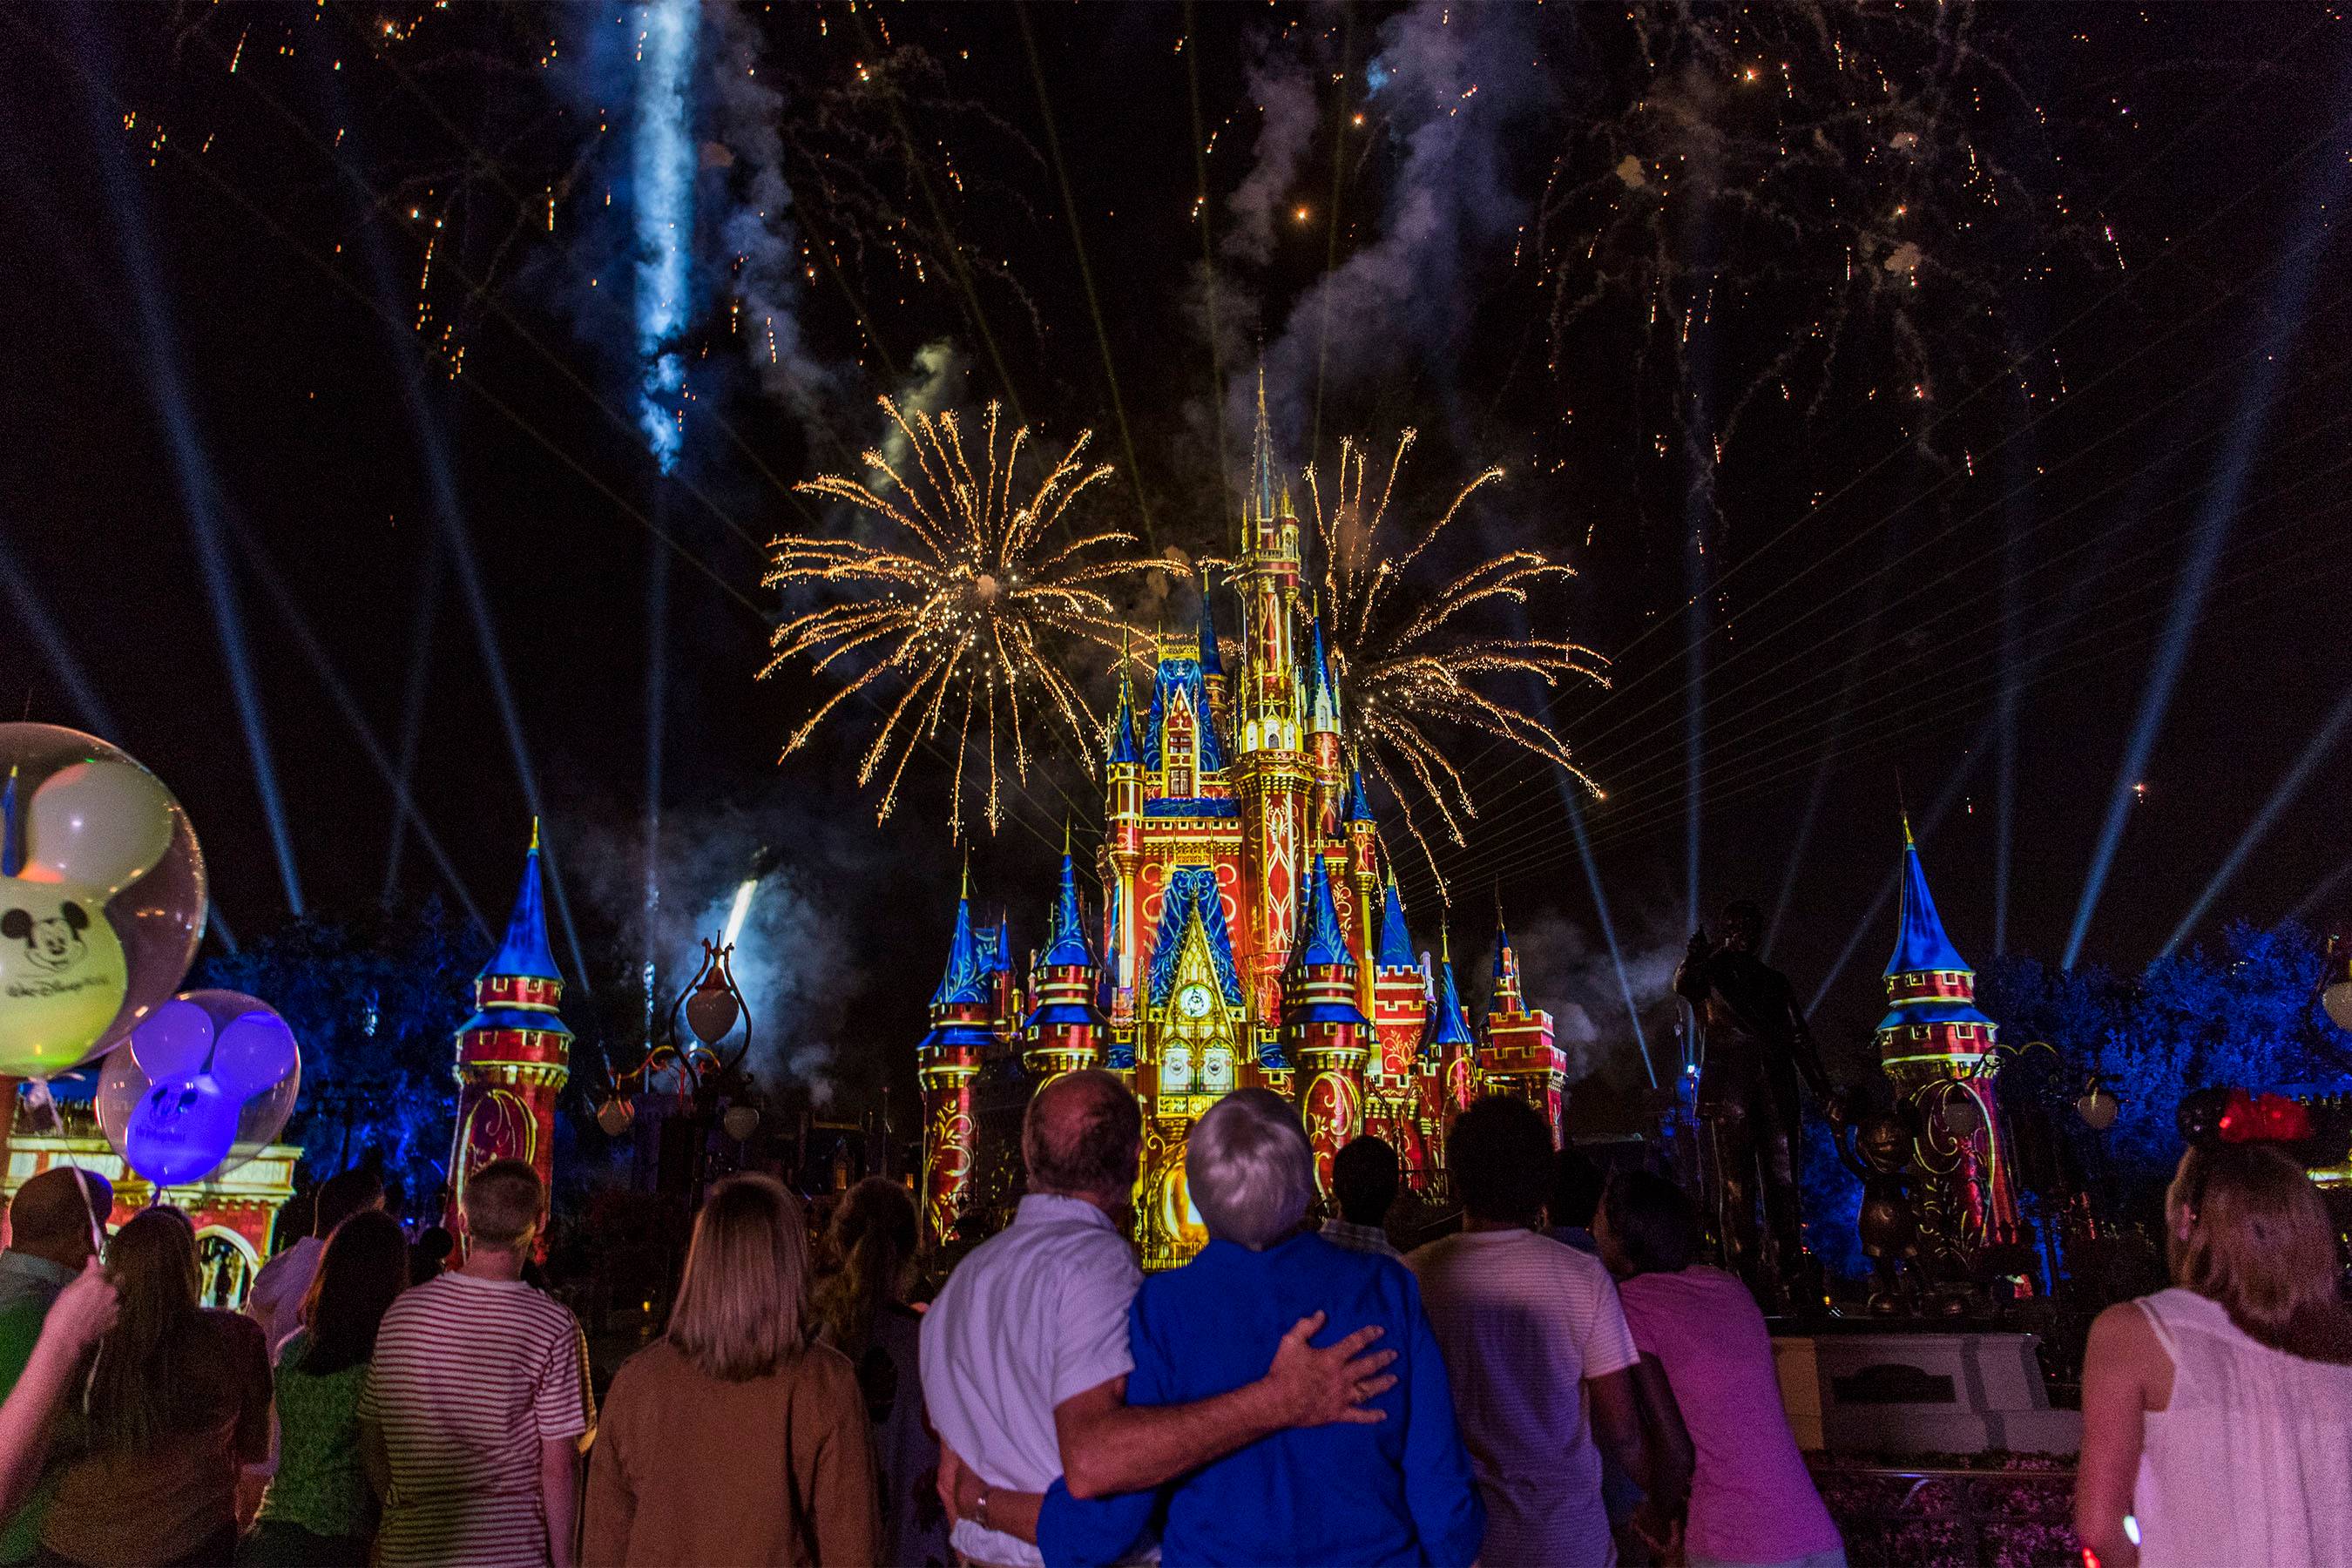 LIVE VIDEO - 'Happily Ever After' debut performance at 9pm from the Magic Kingdom